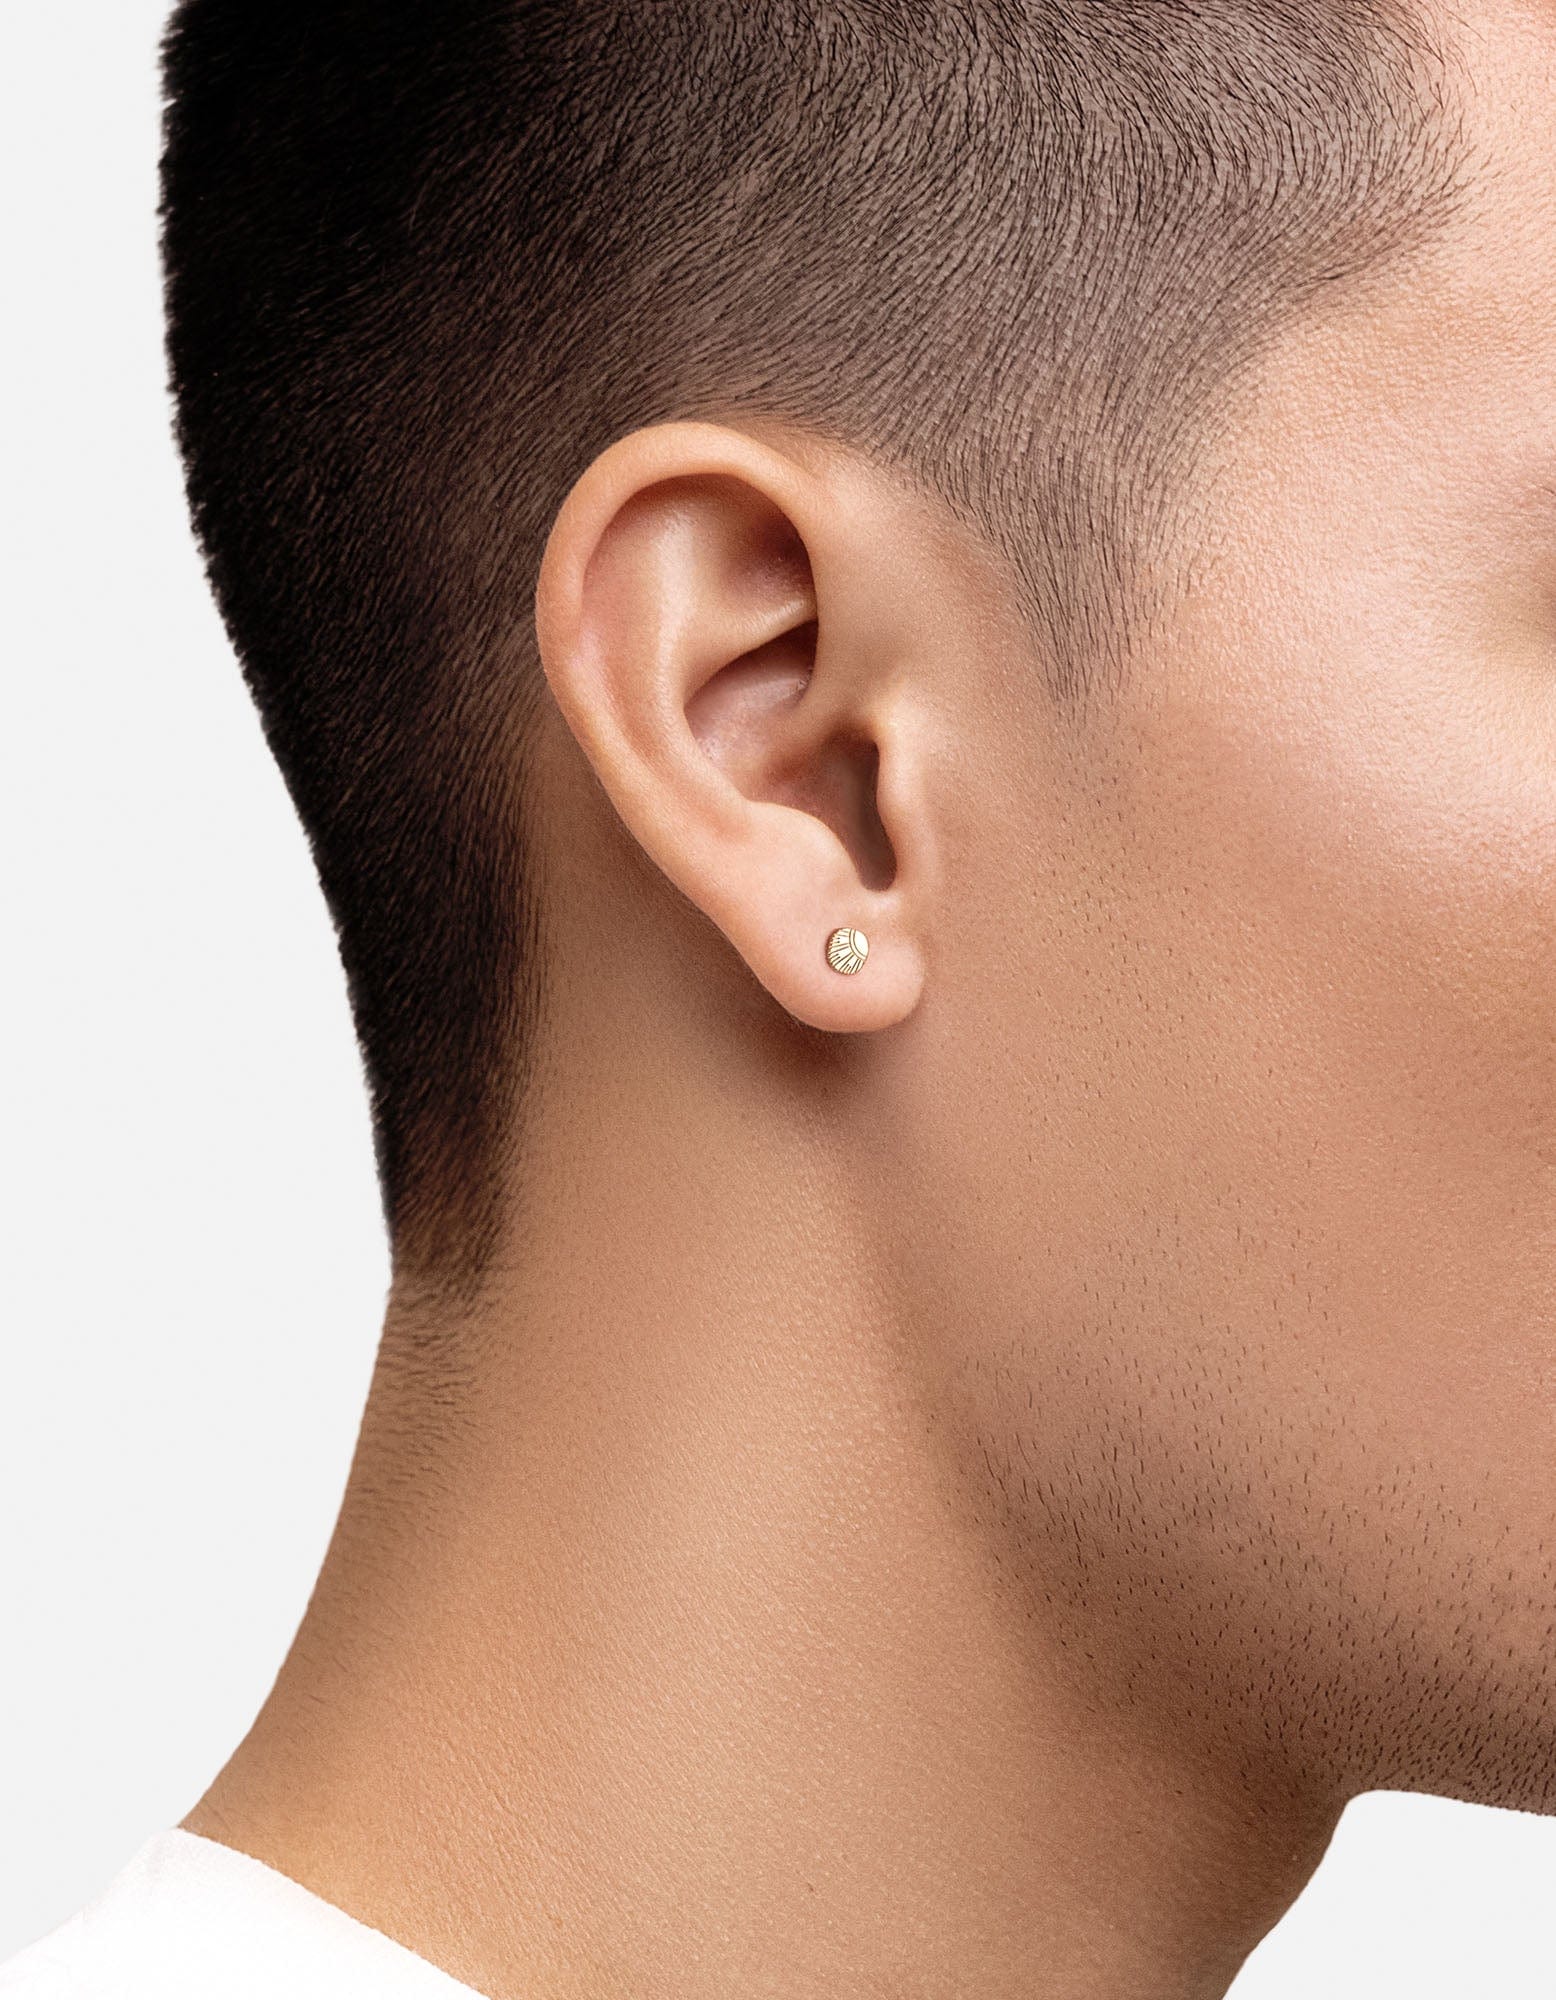 Buy Krystalz? Earrings For Men Boys | Gold Unisex Stainless Steel Ear-studs  | Triangle Stud Earrings For Boys | Mens Accessories Online In India At  Discounted Prices